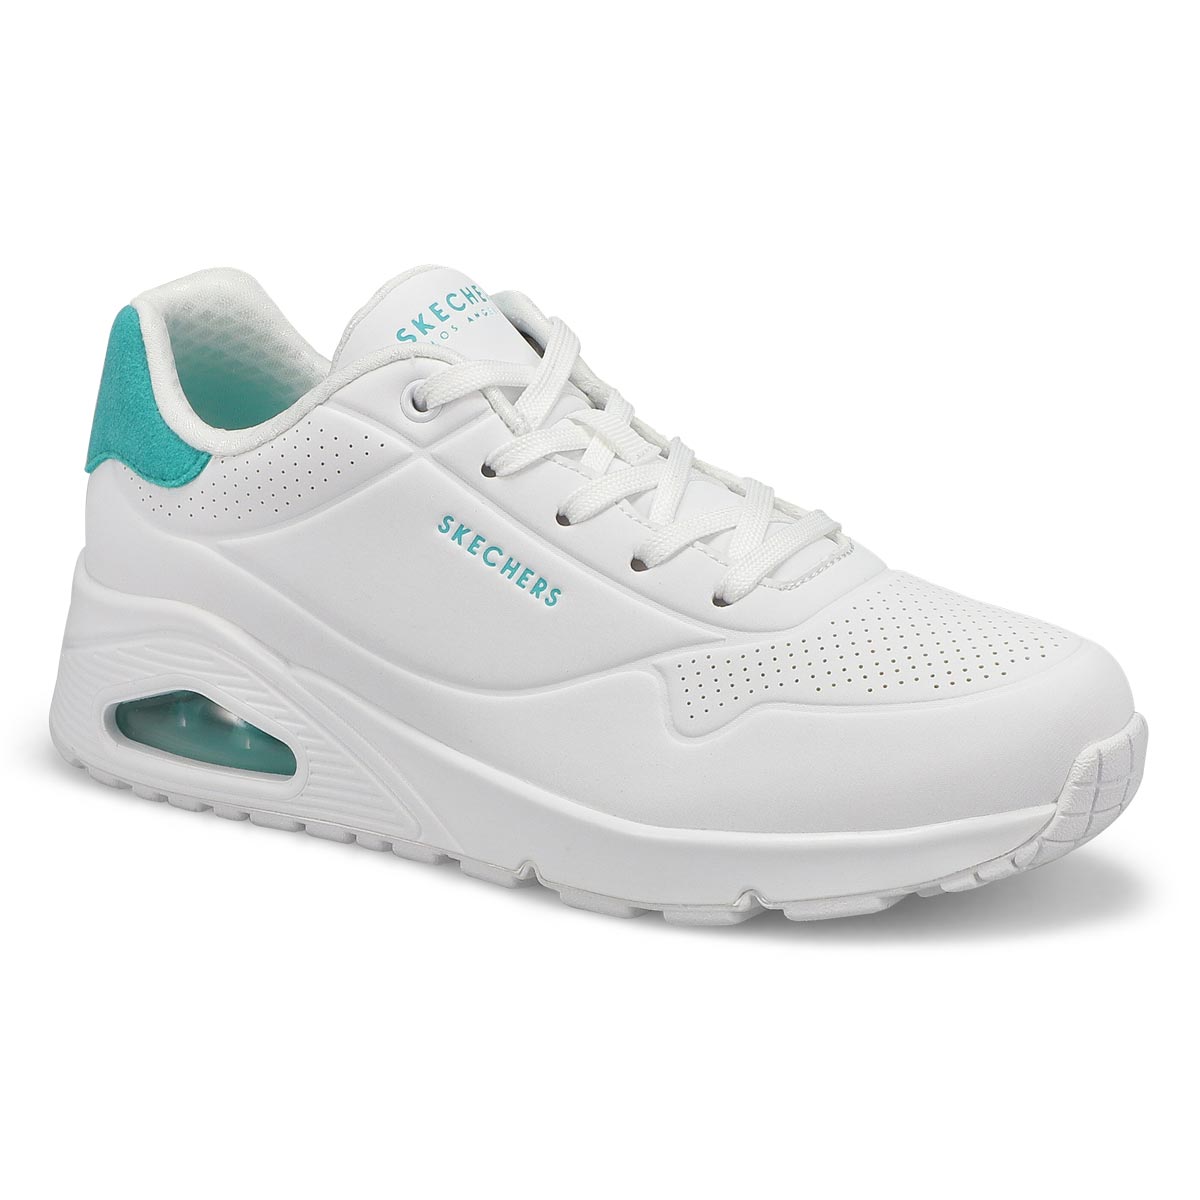 Womens Uno Pop Back Lace Up Sneaker - White/Mint